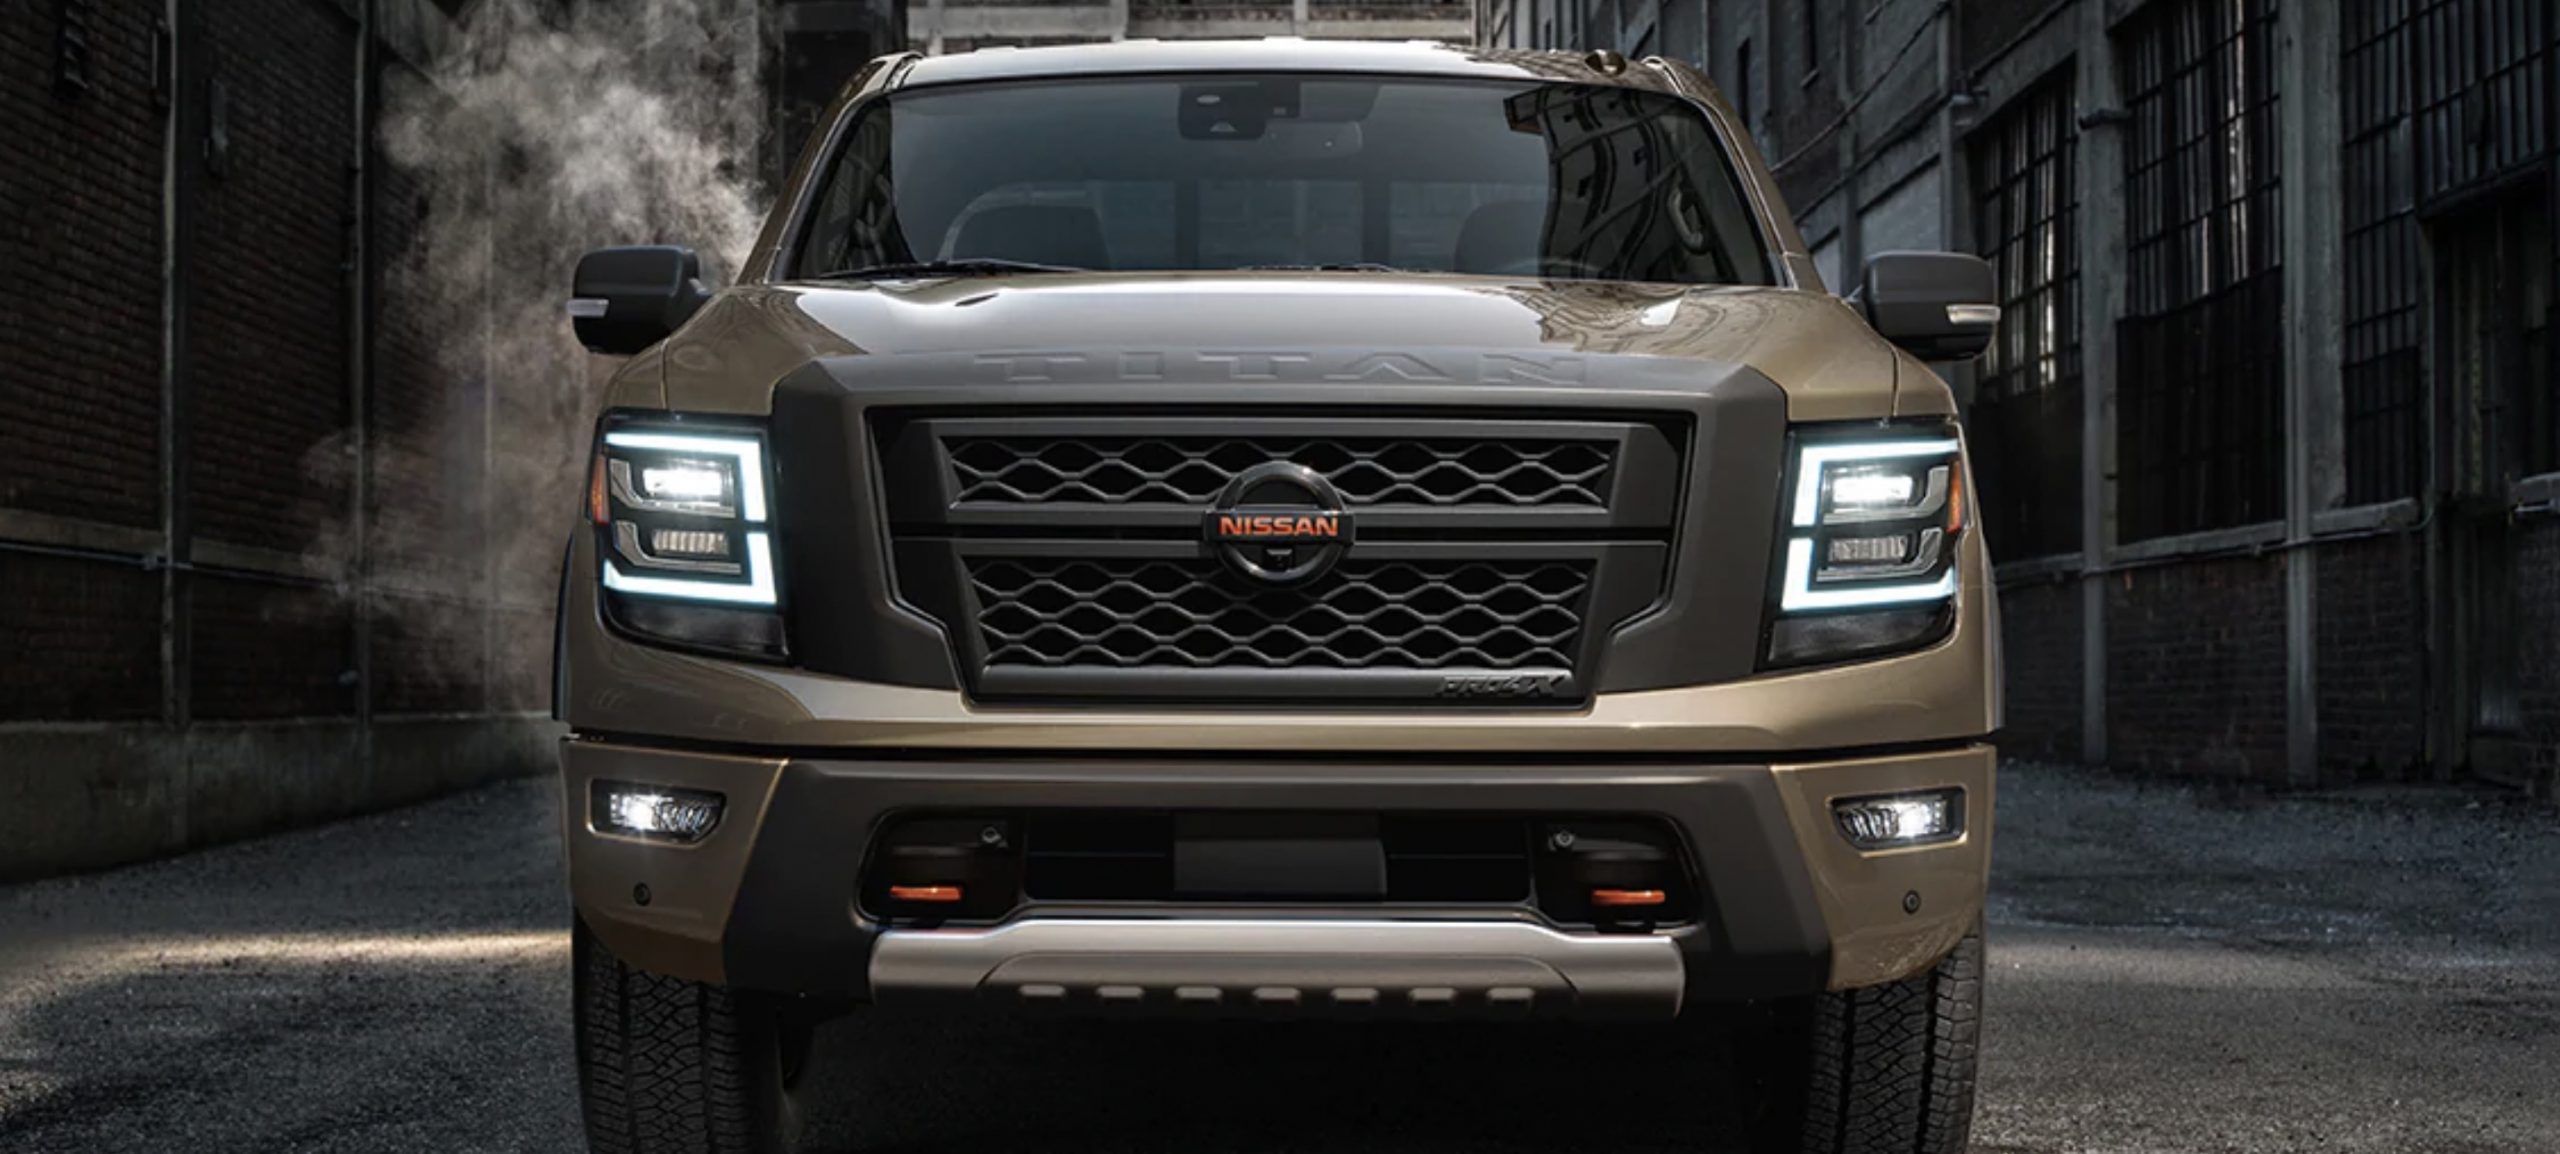 Nissan Titan EV to join Tesla Cybertruck, Rivian R1T, and others in  electric pickup revolution